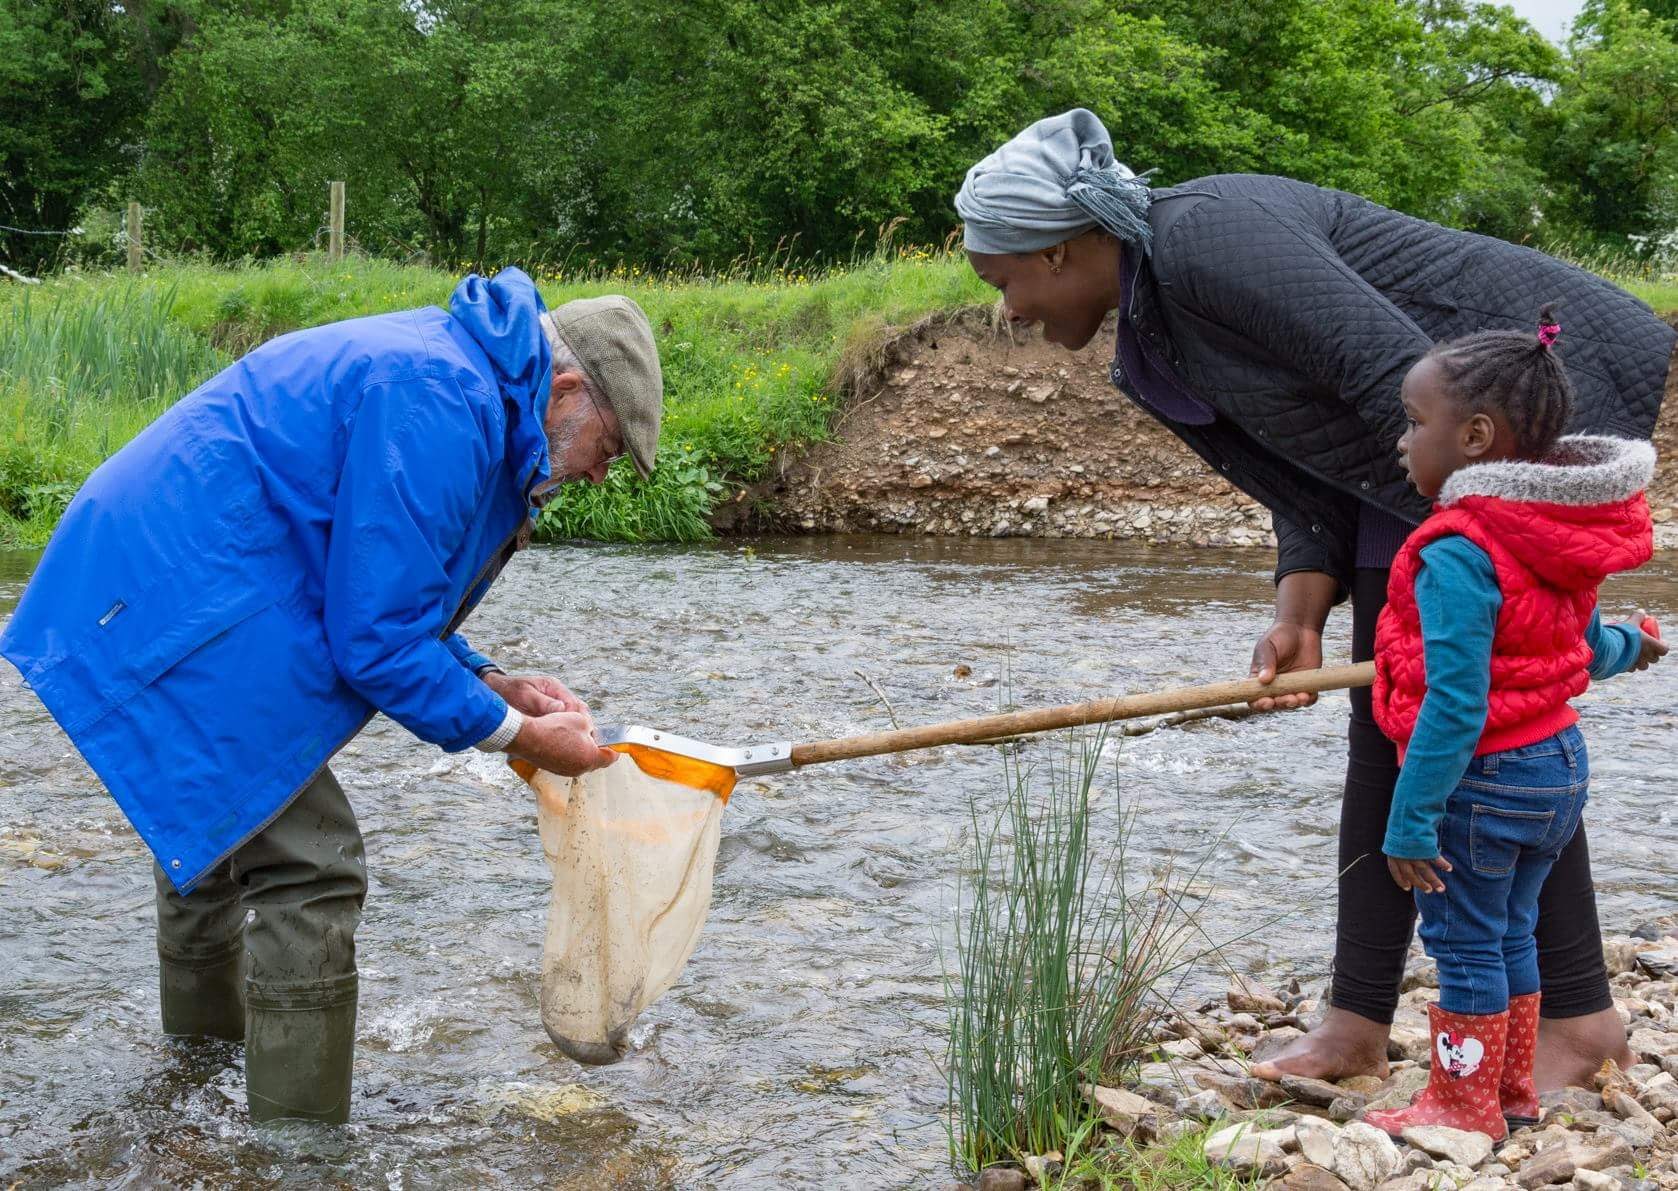 A woman standing with toddler stands by a stream with fishing net. An older man who is wading in the stream is examining the contents of the net.